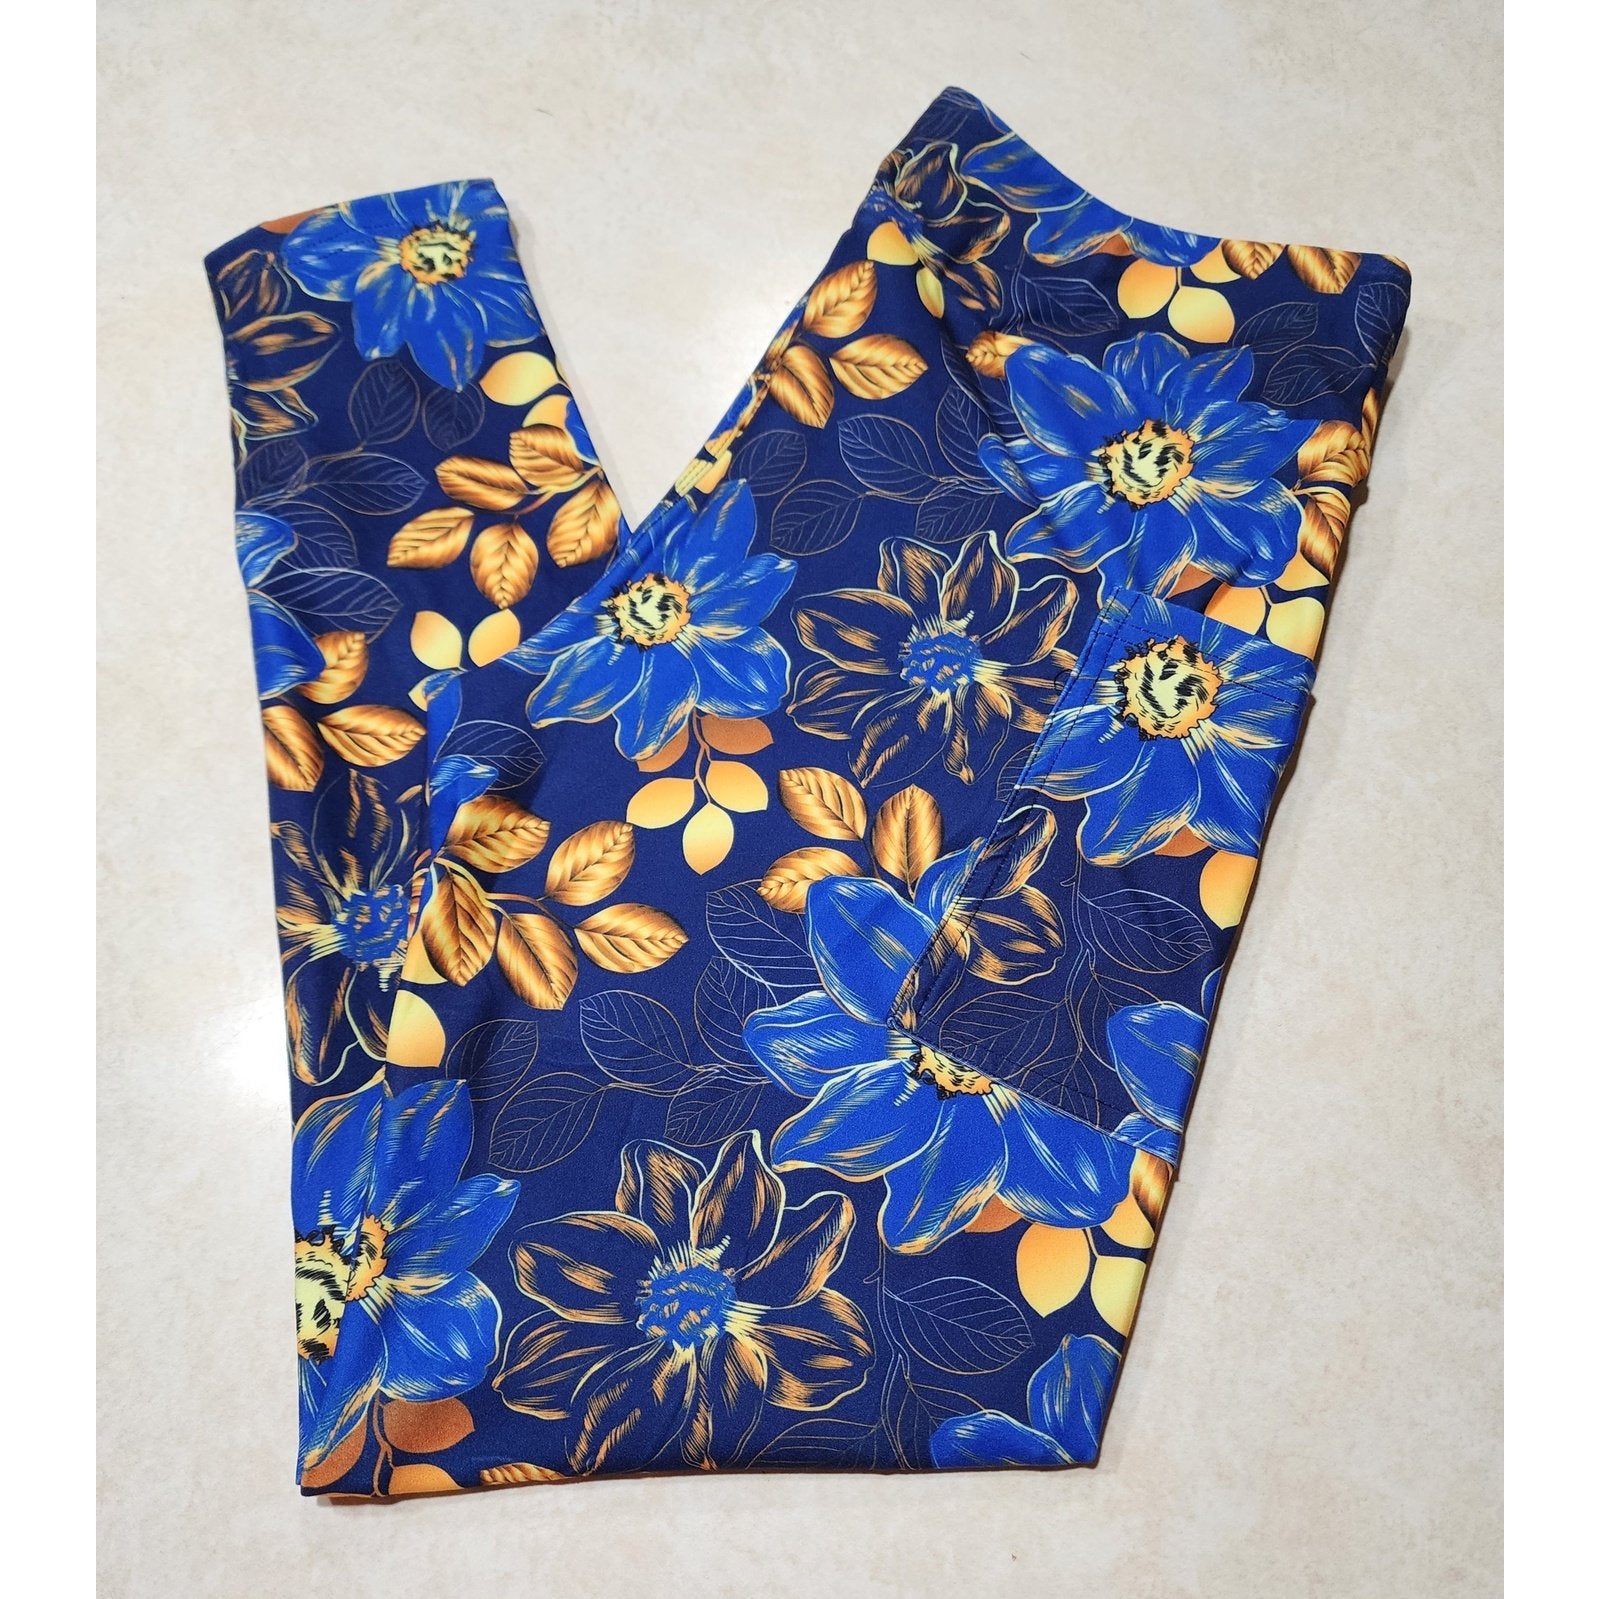 Royal Blue Flower Blooms with Gold Accent Leaf Full Length w/ Pockets